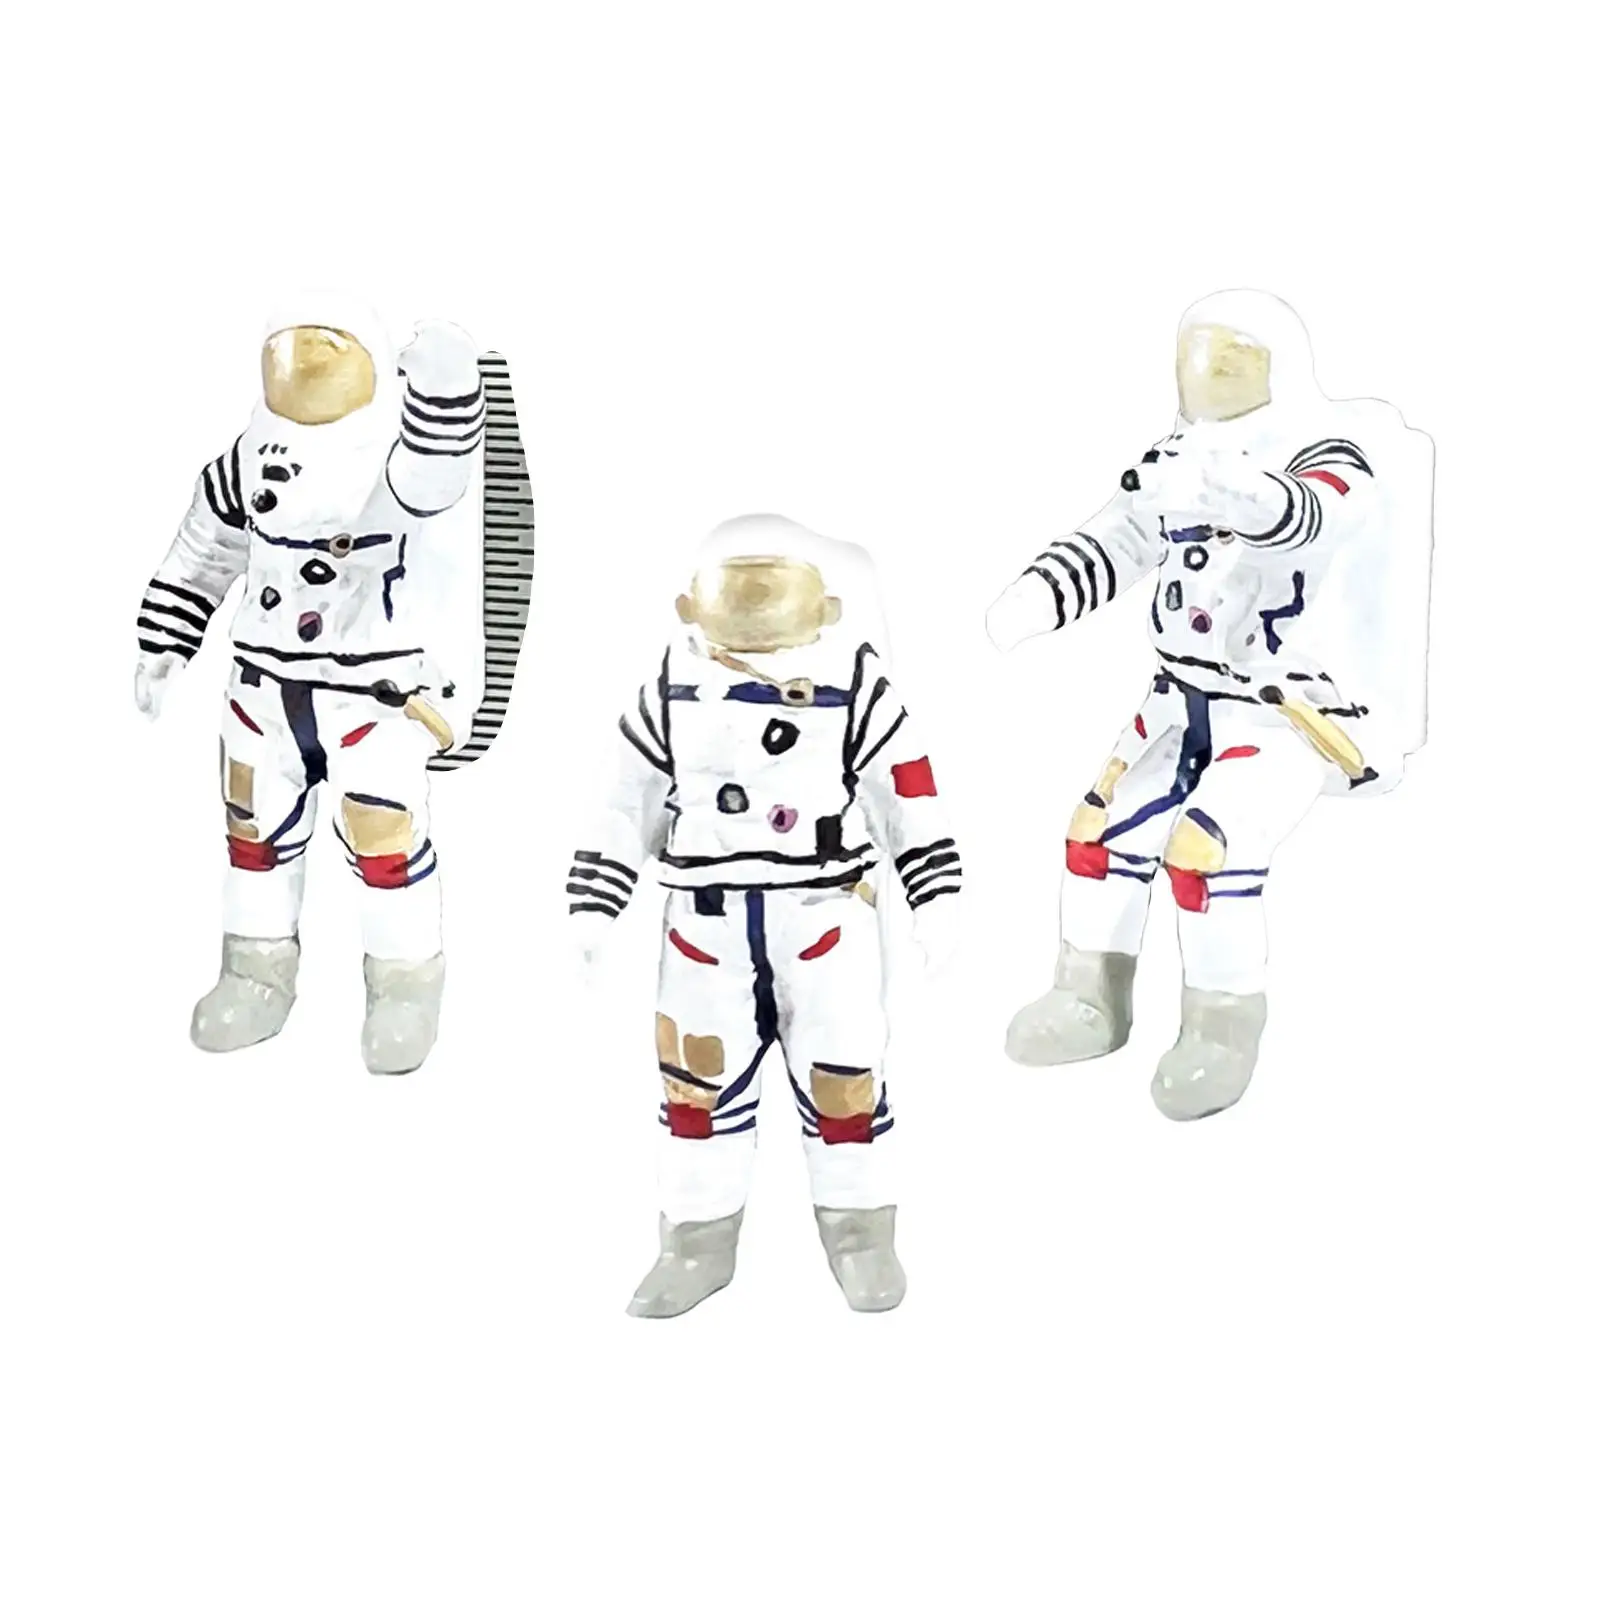 3 Pieces 1/64 Astronaut Figurines Crafts Mini Astronaut Toys for Diorama Dollhouse Photography Props Micro Landscapes Decoration